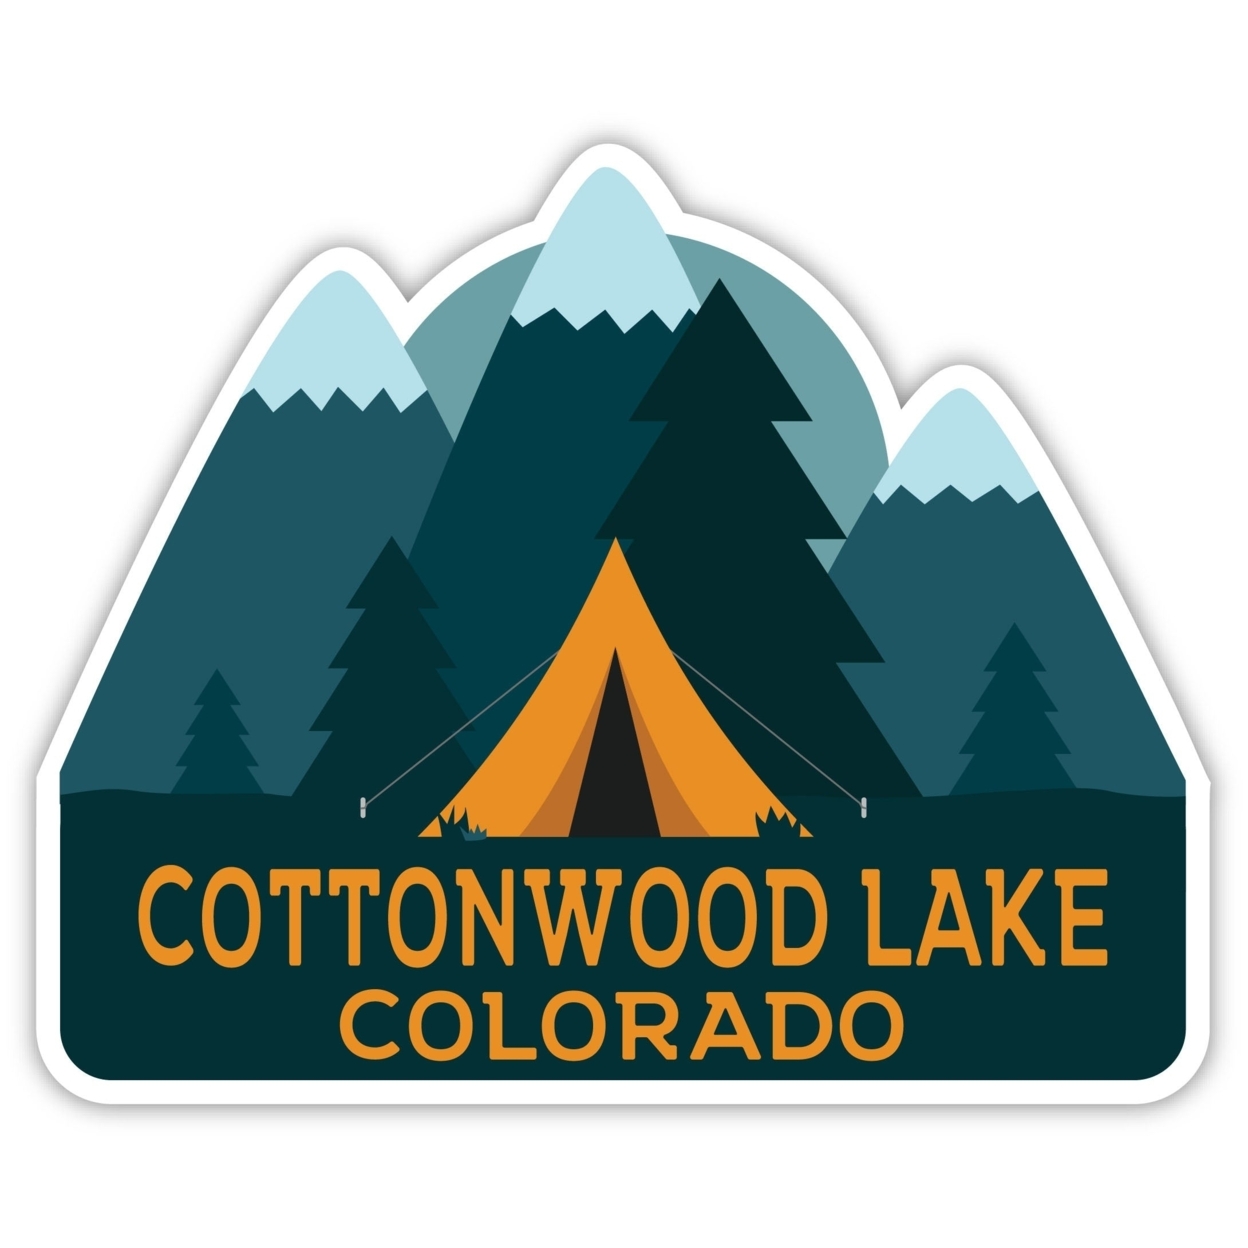 Cottonwood Lake Colorado Souvenir Decorative Stickers (Choose Theme And Size) - 4-Pack, 4-Inch, Great Outdoors